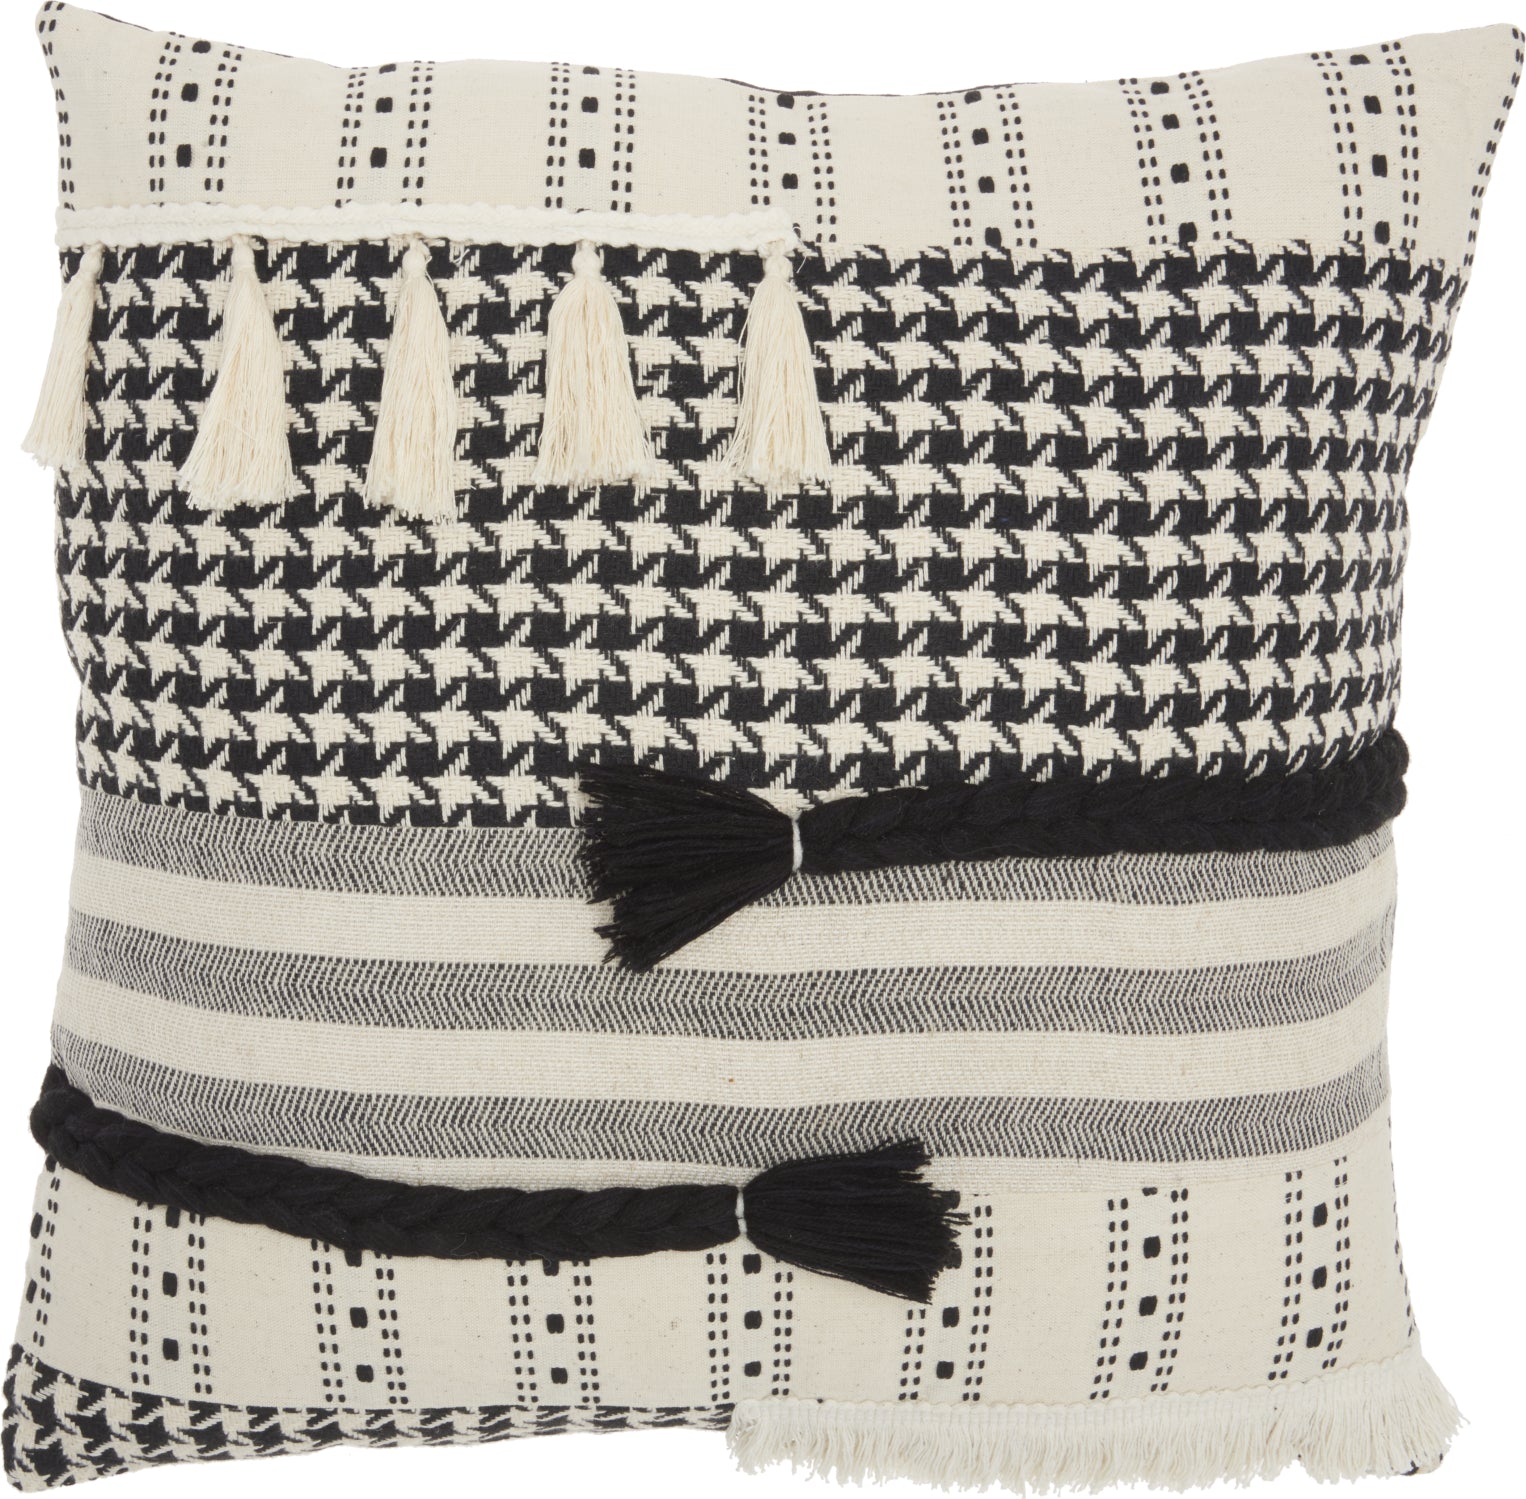 Nourison Life Styles TASSEL TEXTURE Black/White by Mina Victory main image